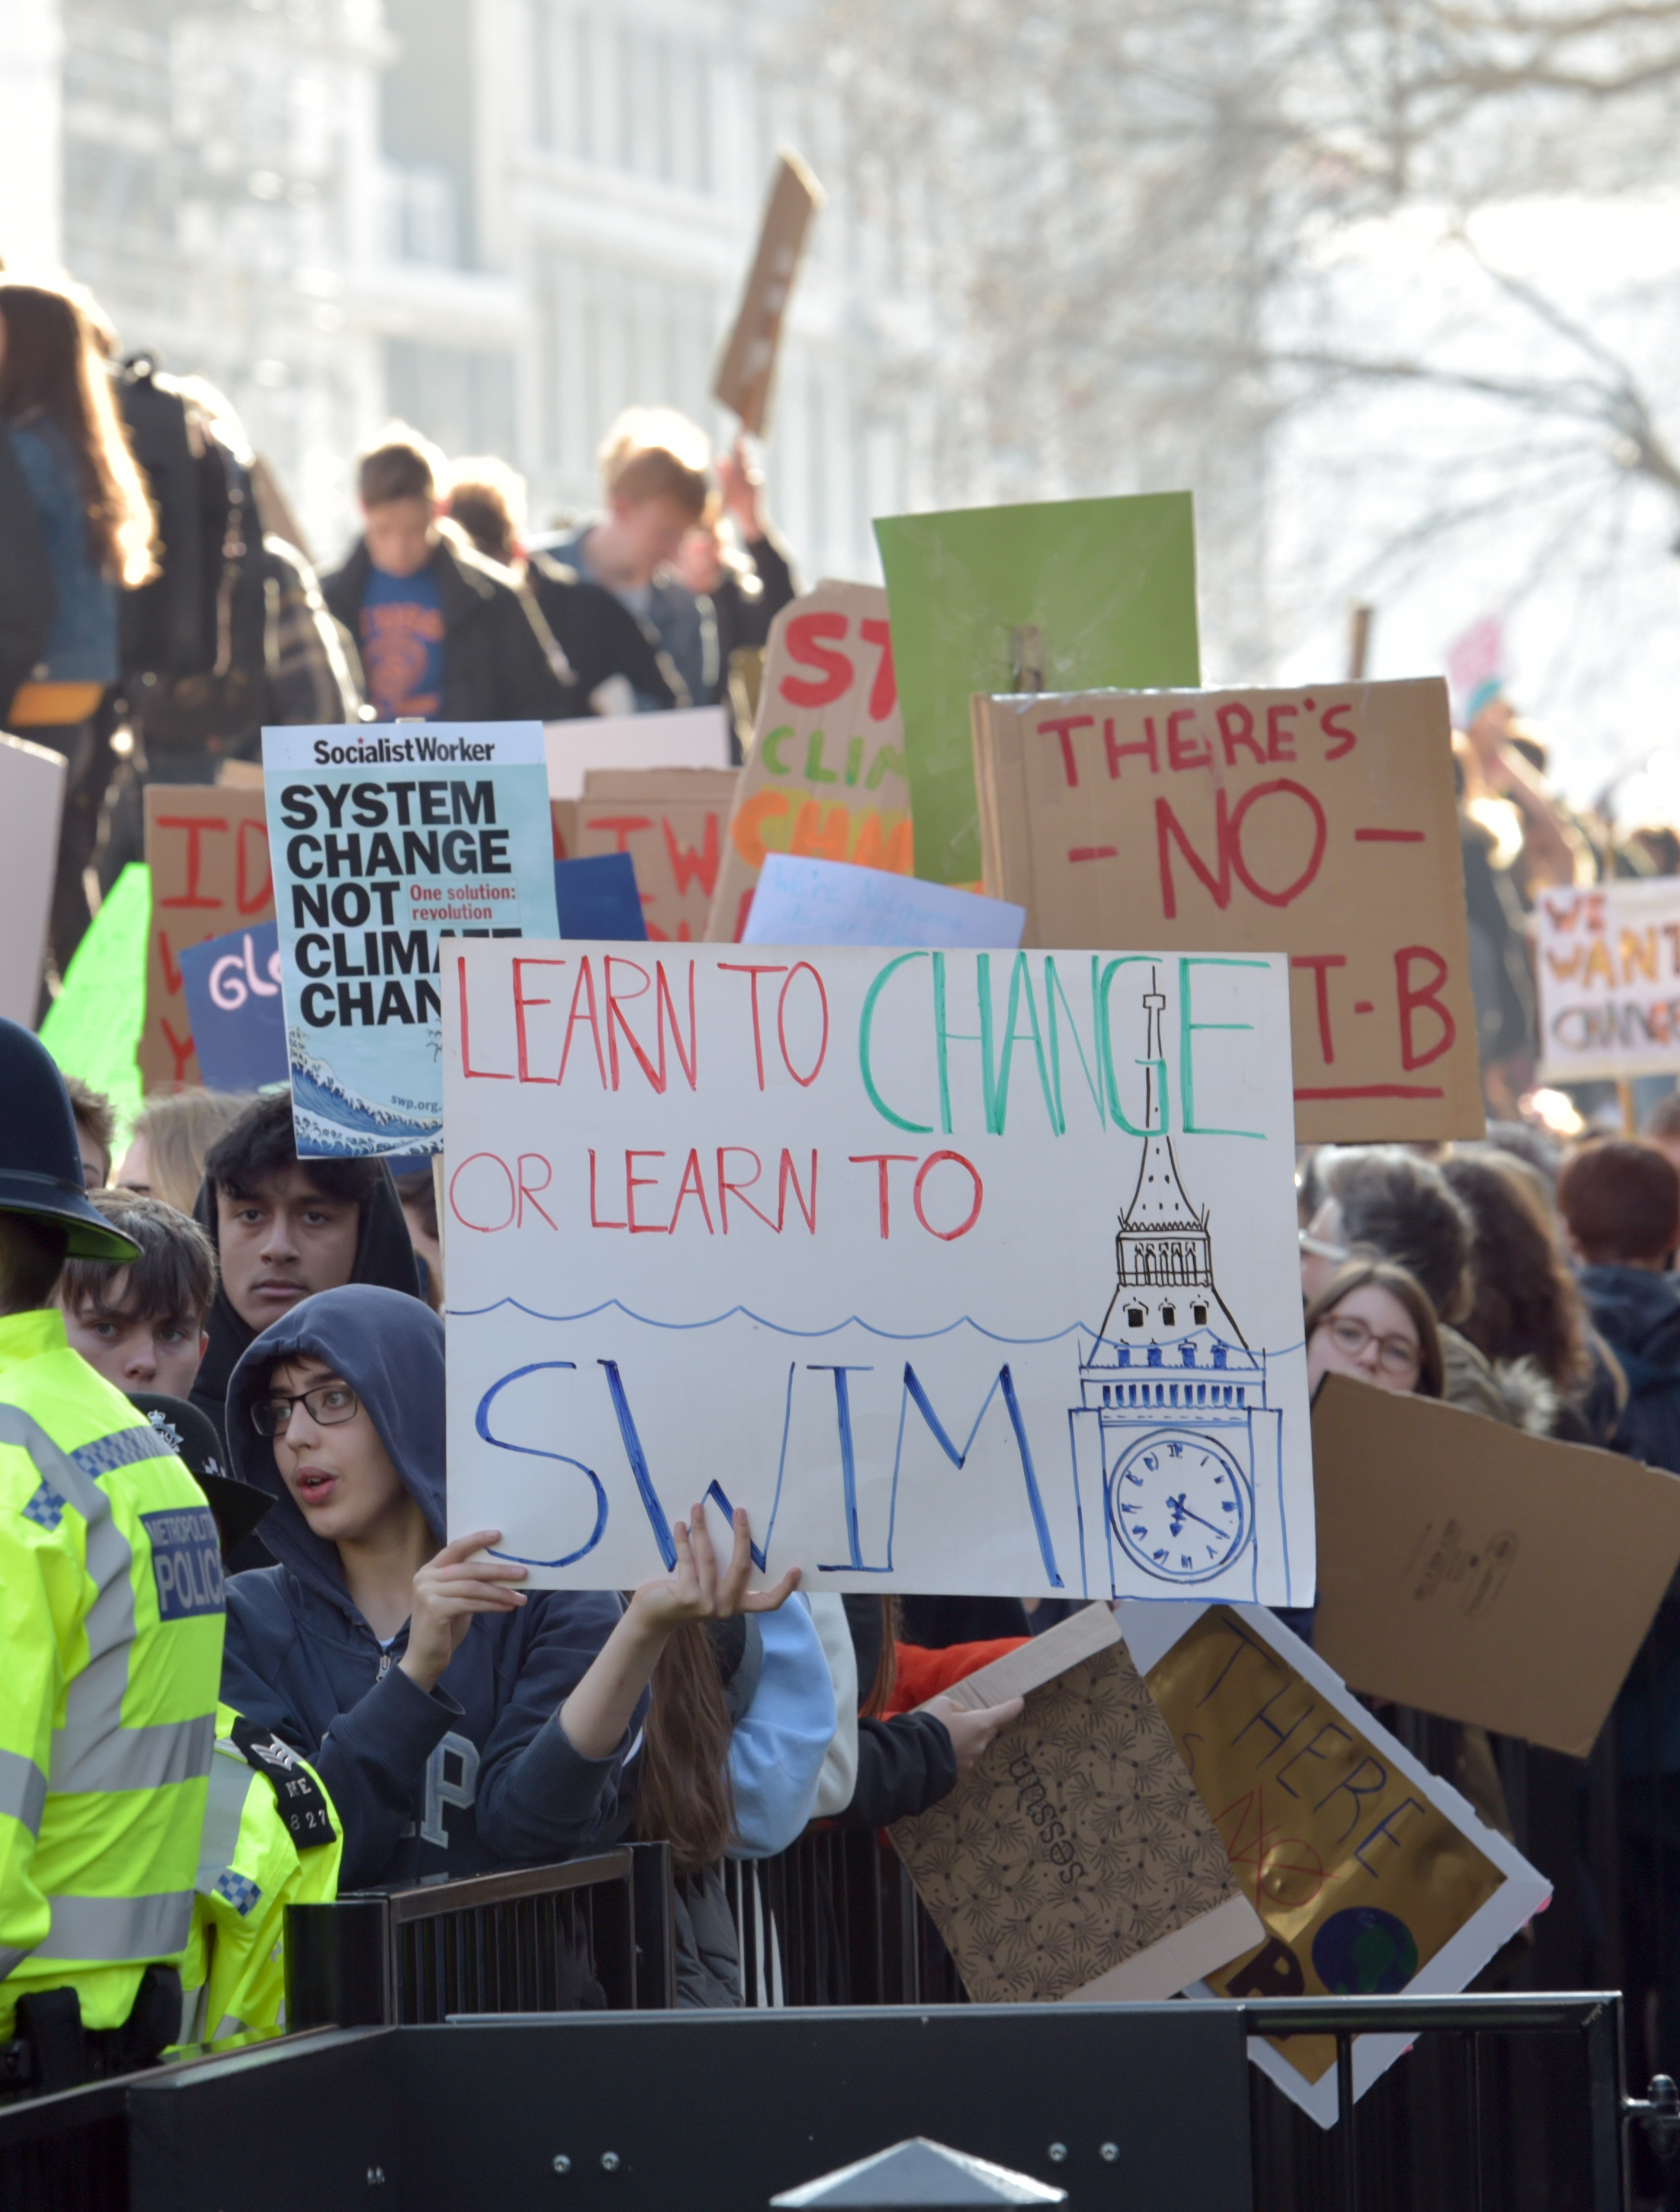 Students from the Youth Strike 4 Climate movement outside the gates of Downing Street during a climate change protest on in Westminster, London